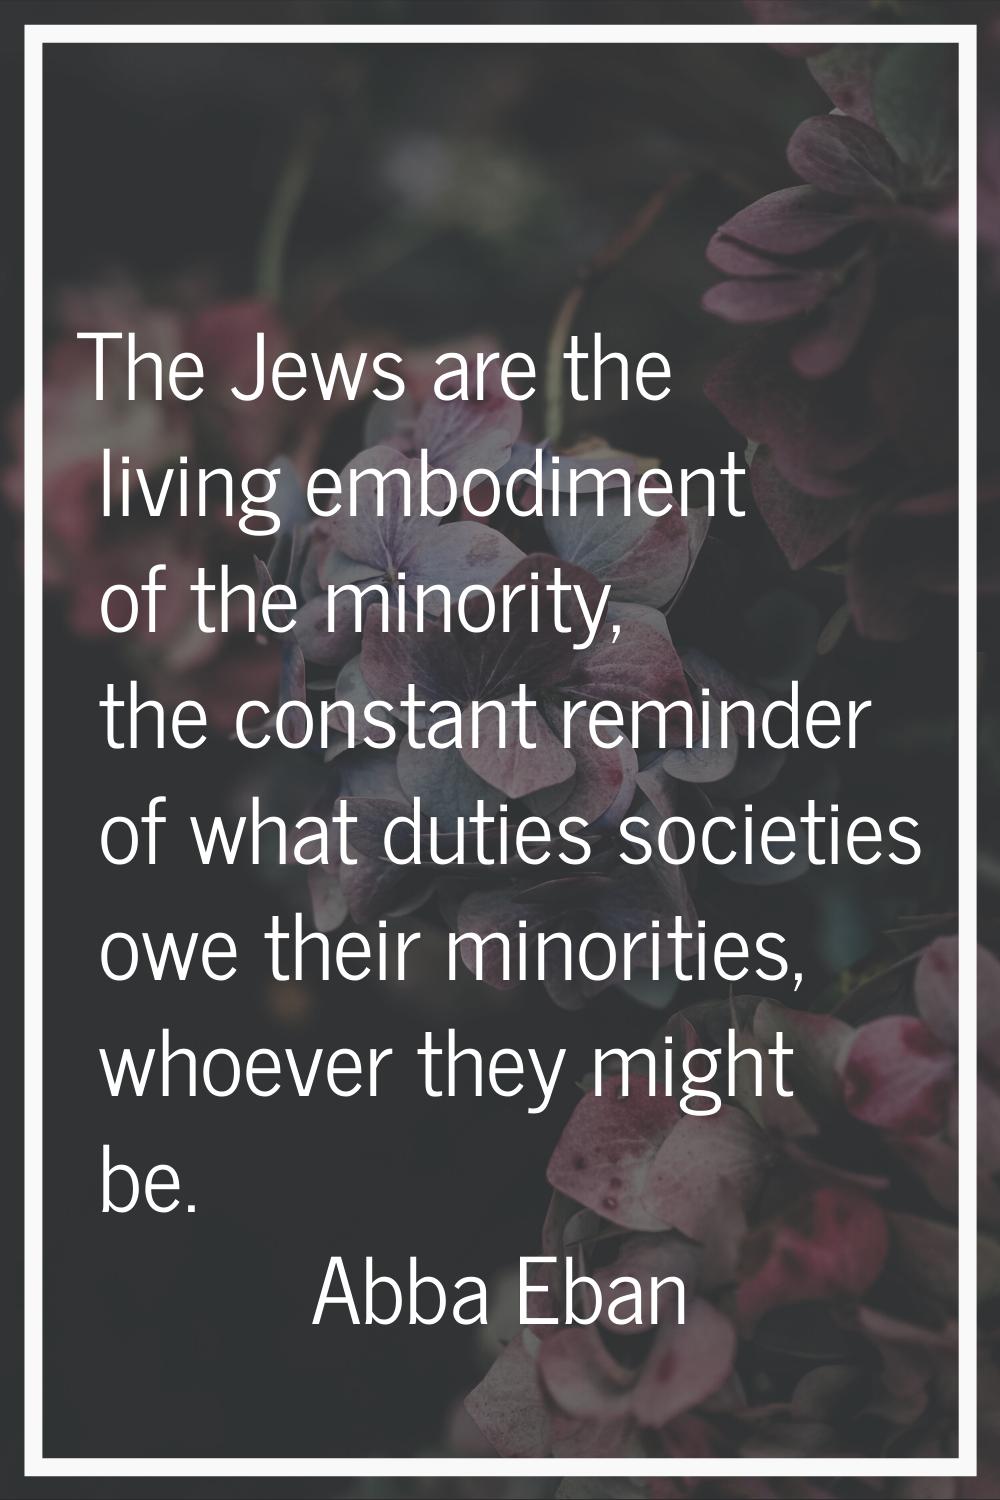 The Jews are the living embodiment of the minority, the constant reminder of what duties societies 